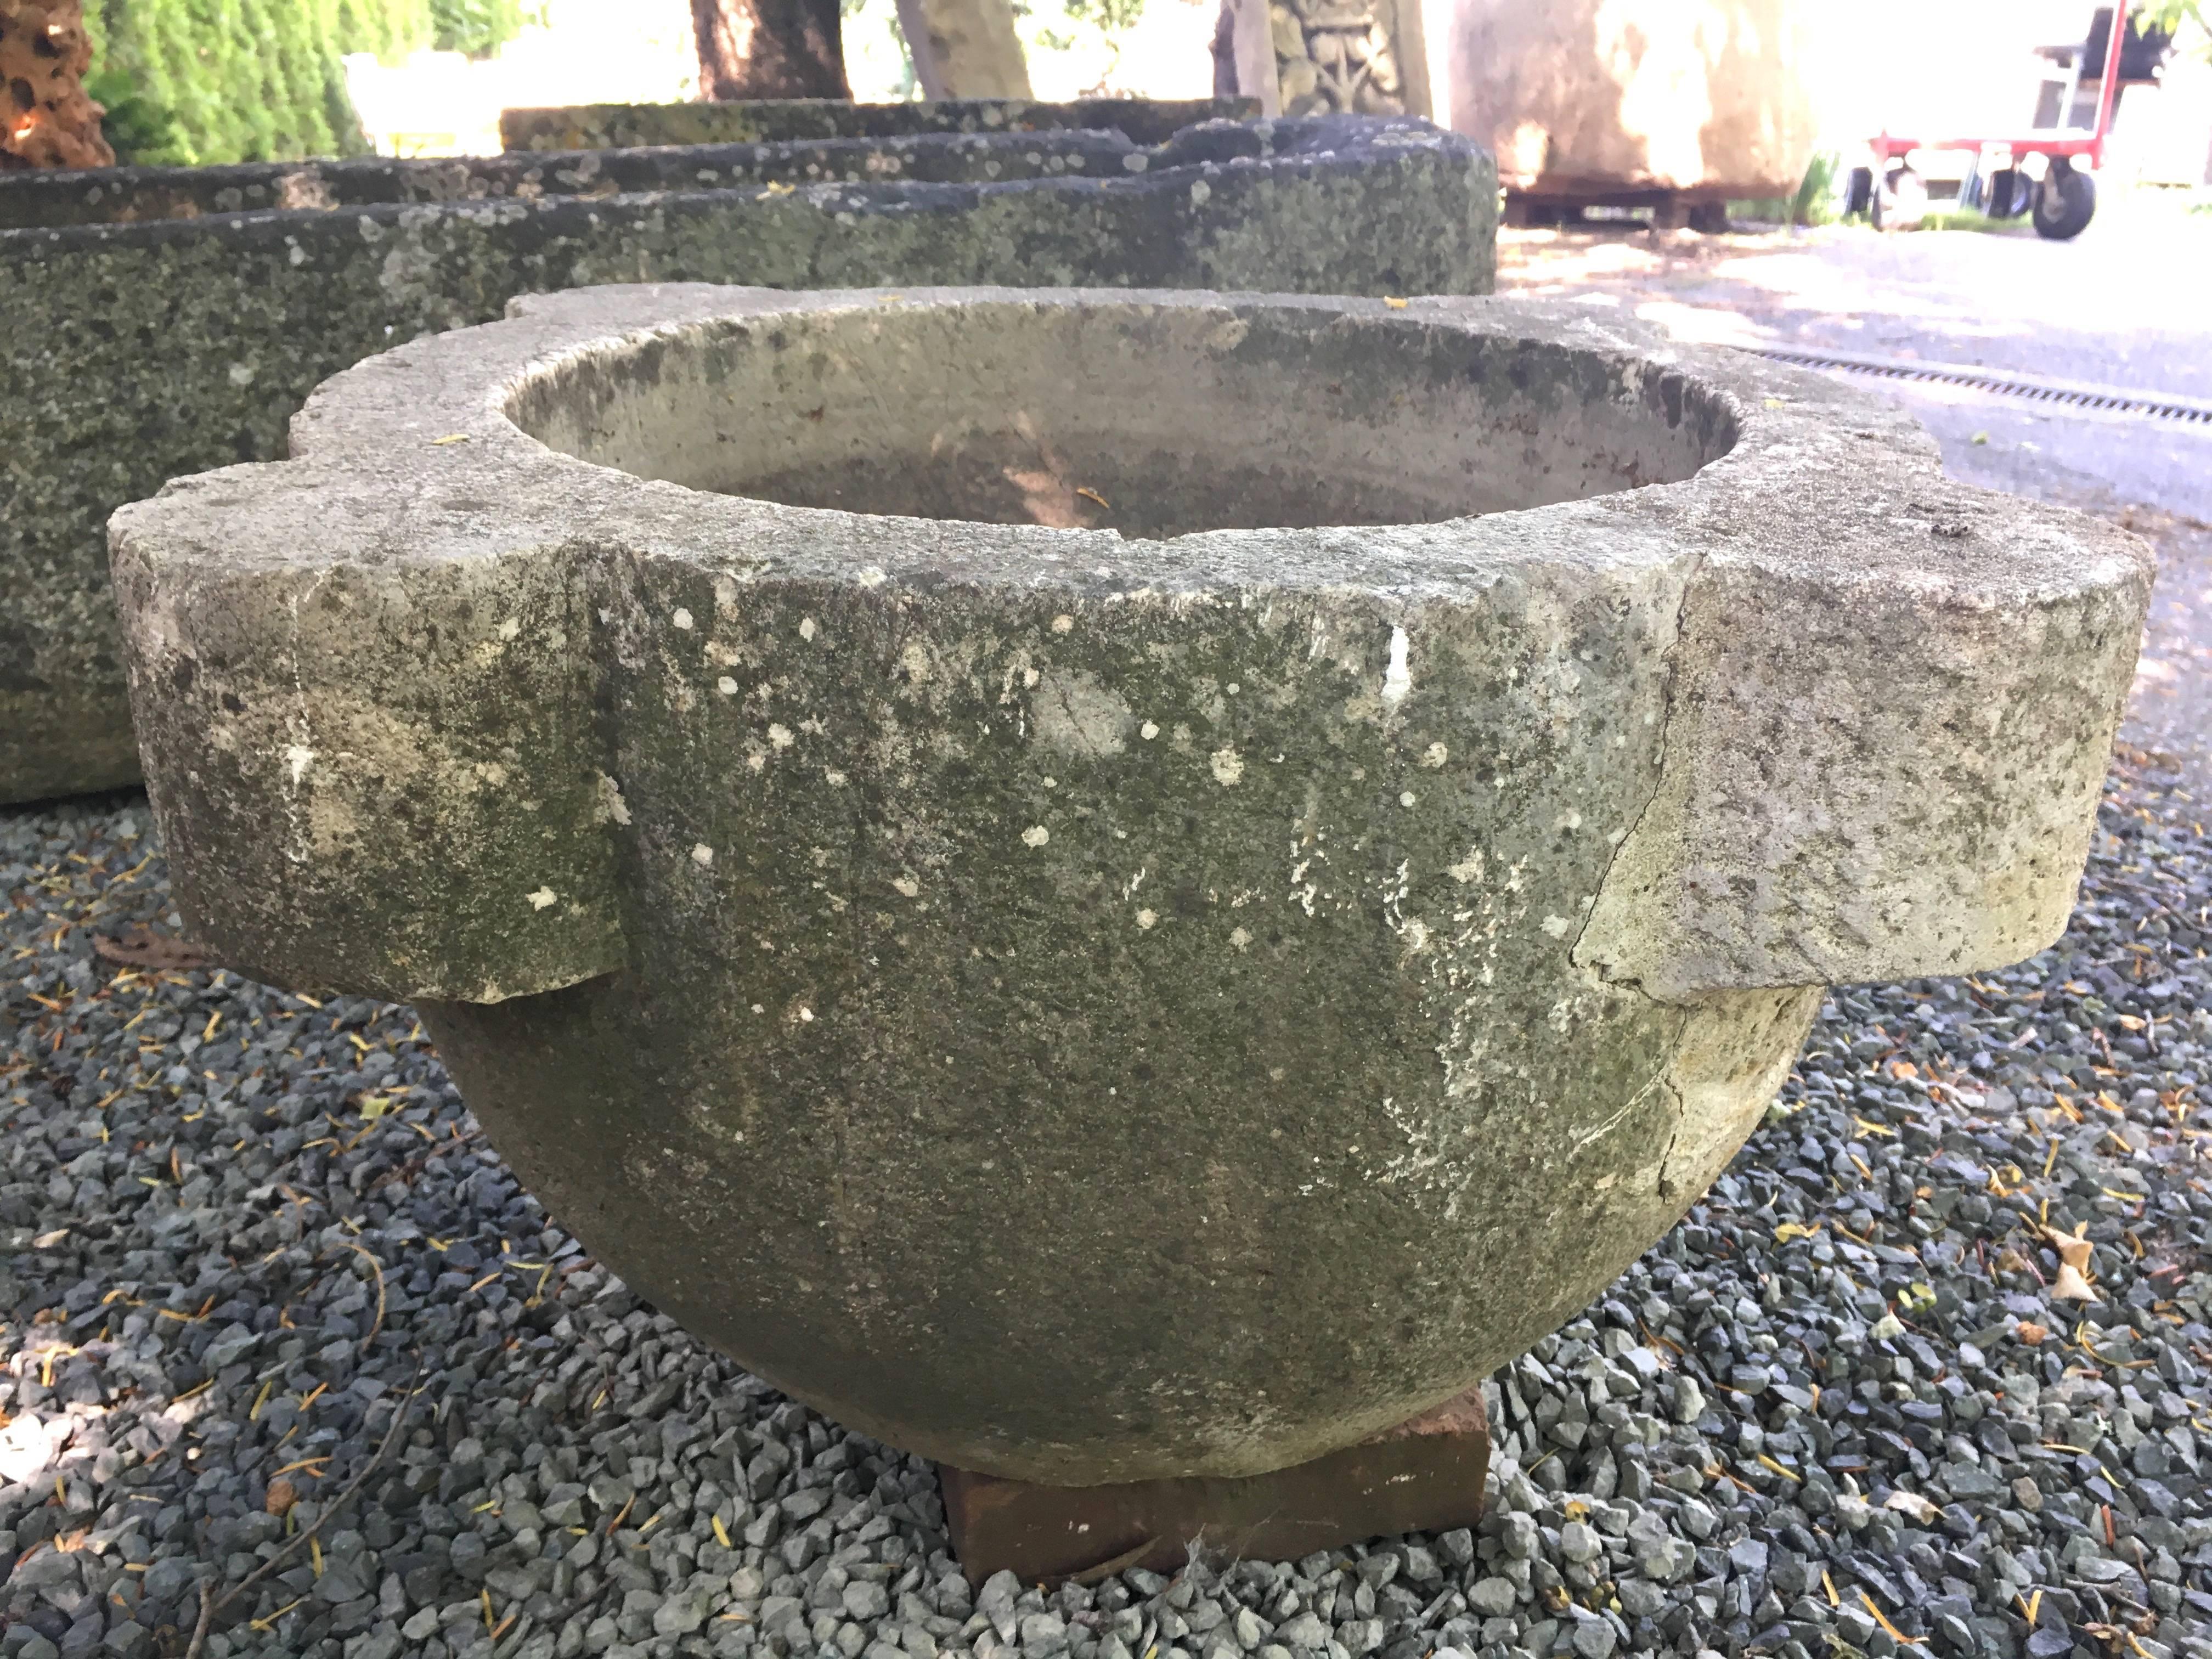 This late 18th C mortar was originally used to grind food stuffs or medicines but it is the perfect size for a planter or small fountain. Hand-carved from a hard stone from the Var region of France, it is in excellent antique condition, with a